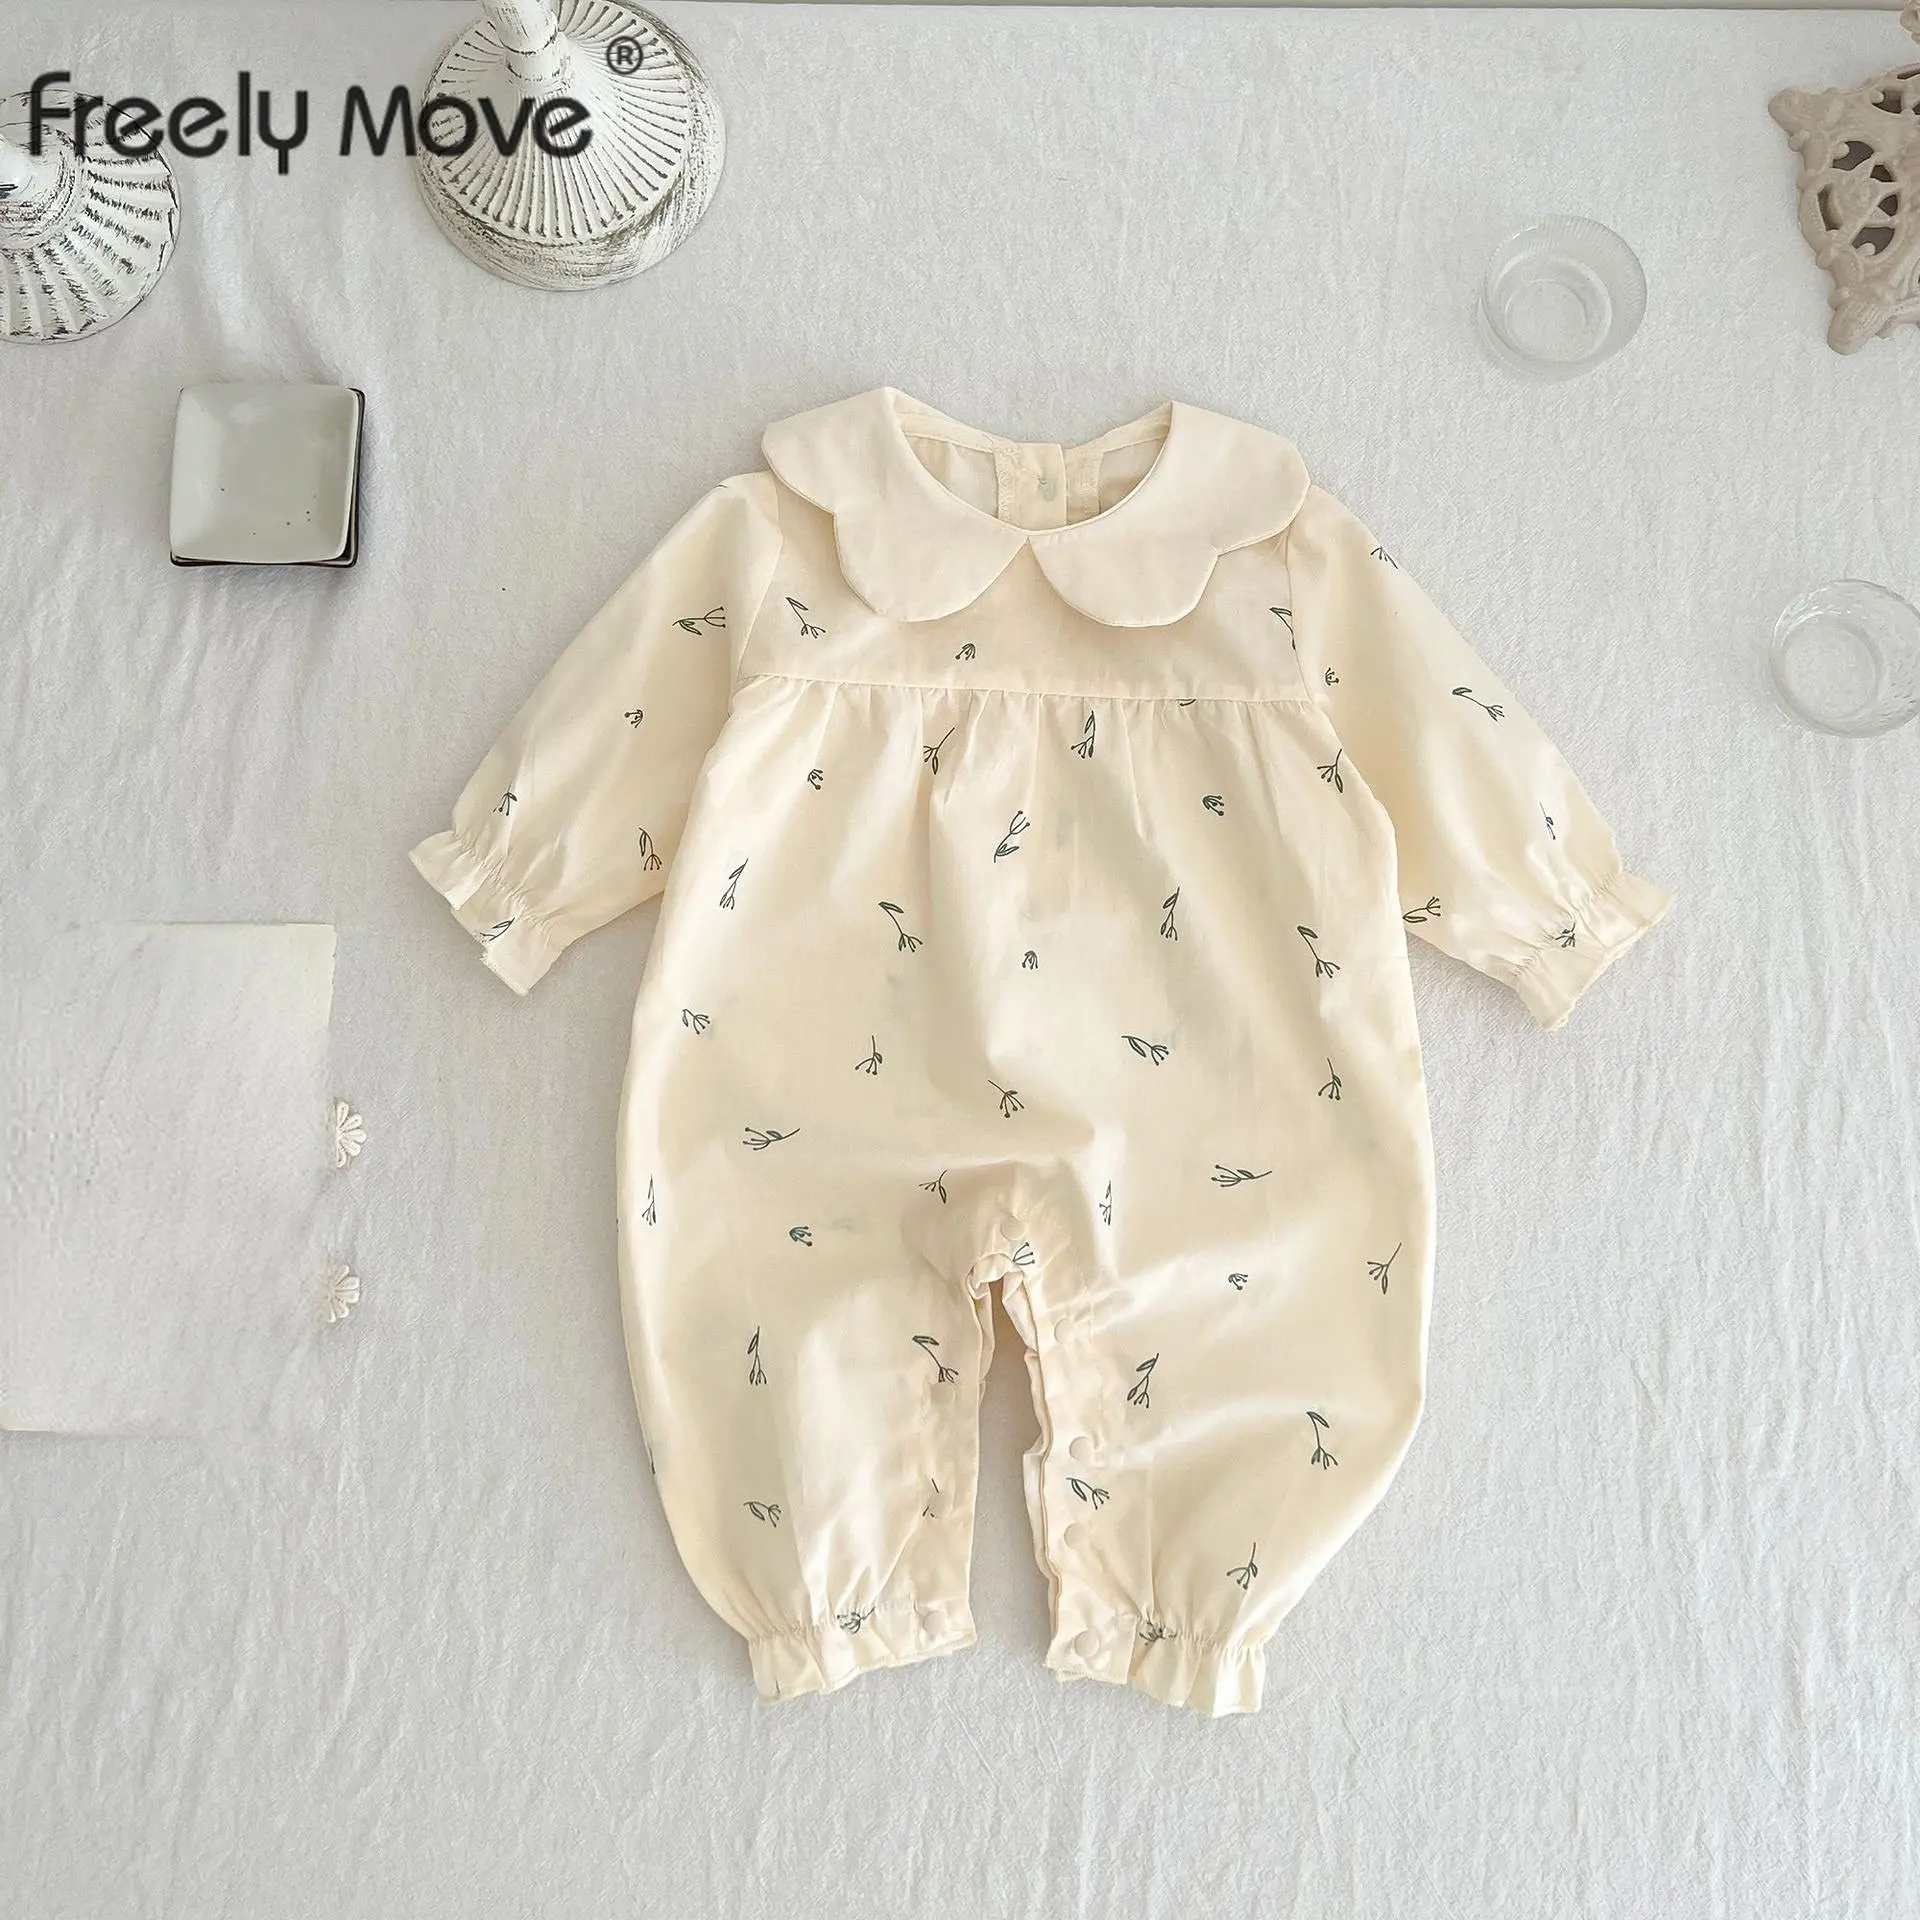 

Freely Move 2022 Autumn Baby Romper Cotton Baby Girl Clothes Newborn Floral Peter Pan Collar Jumpsuit Long-Sleeve Baby Clothing